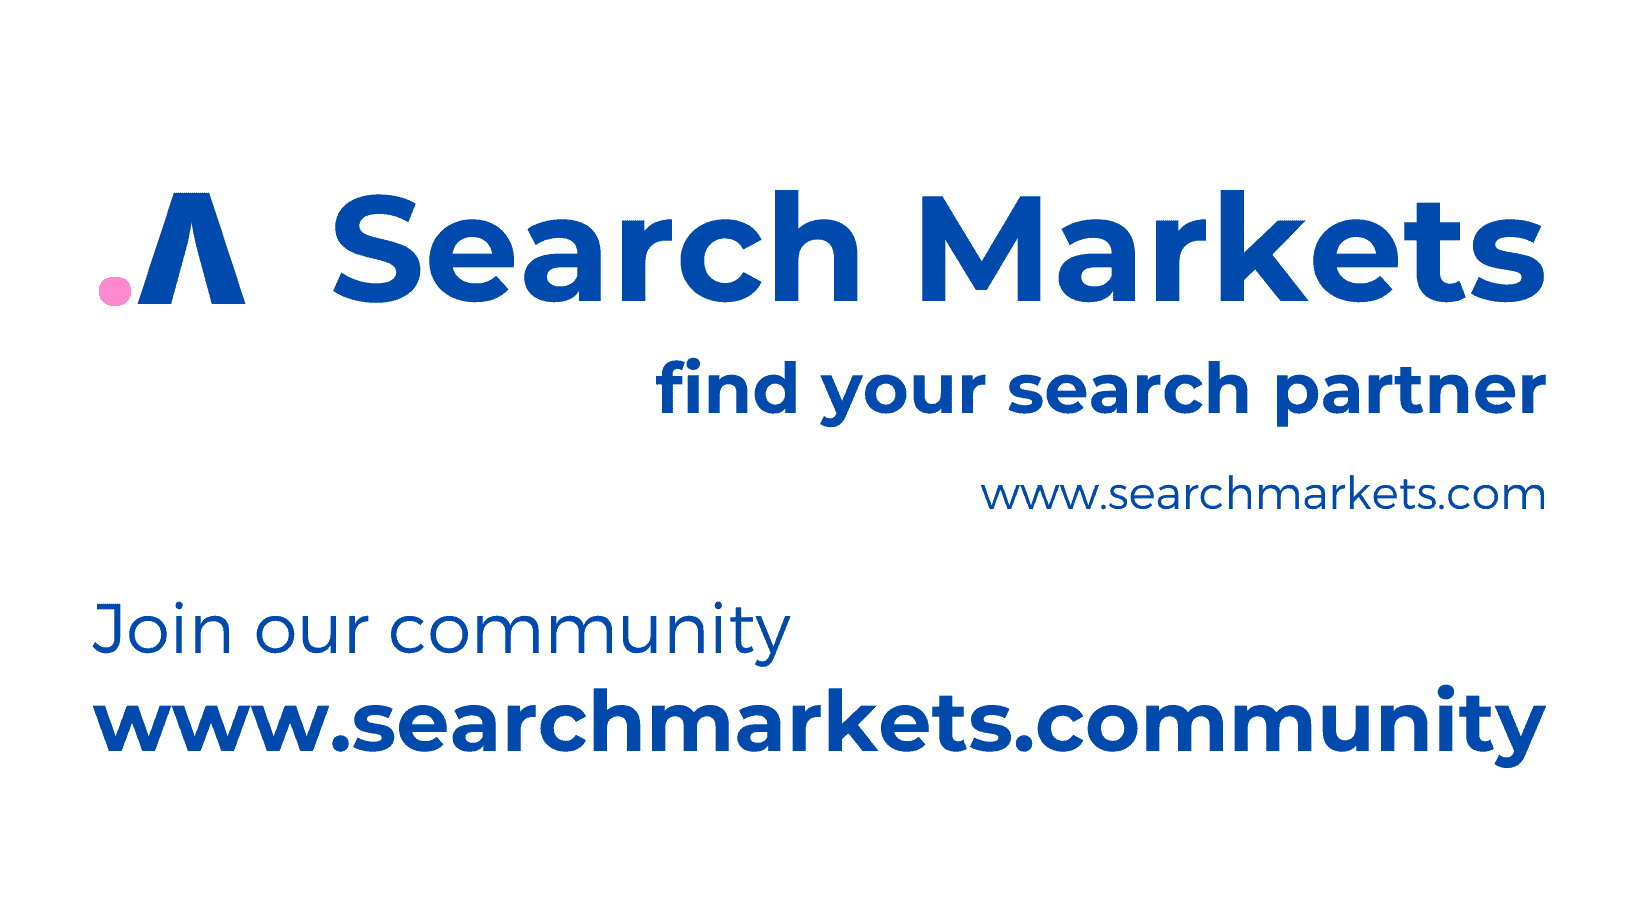 Search-Markets-Facebook-banner-Group-2.png